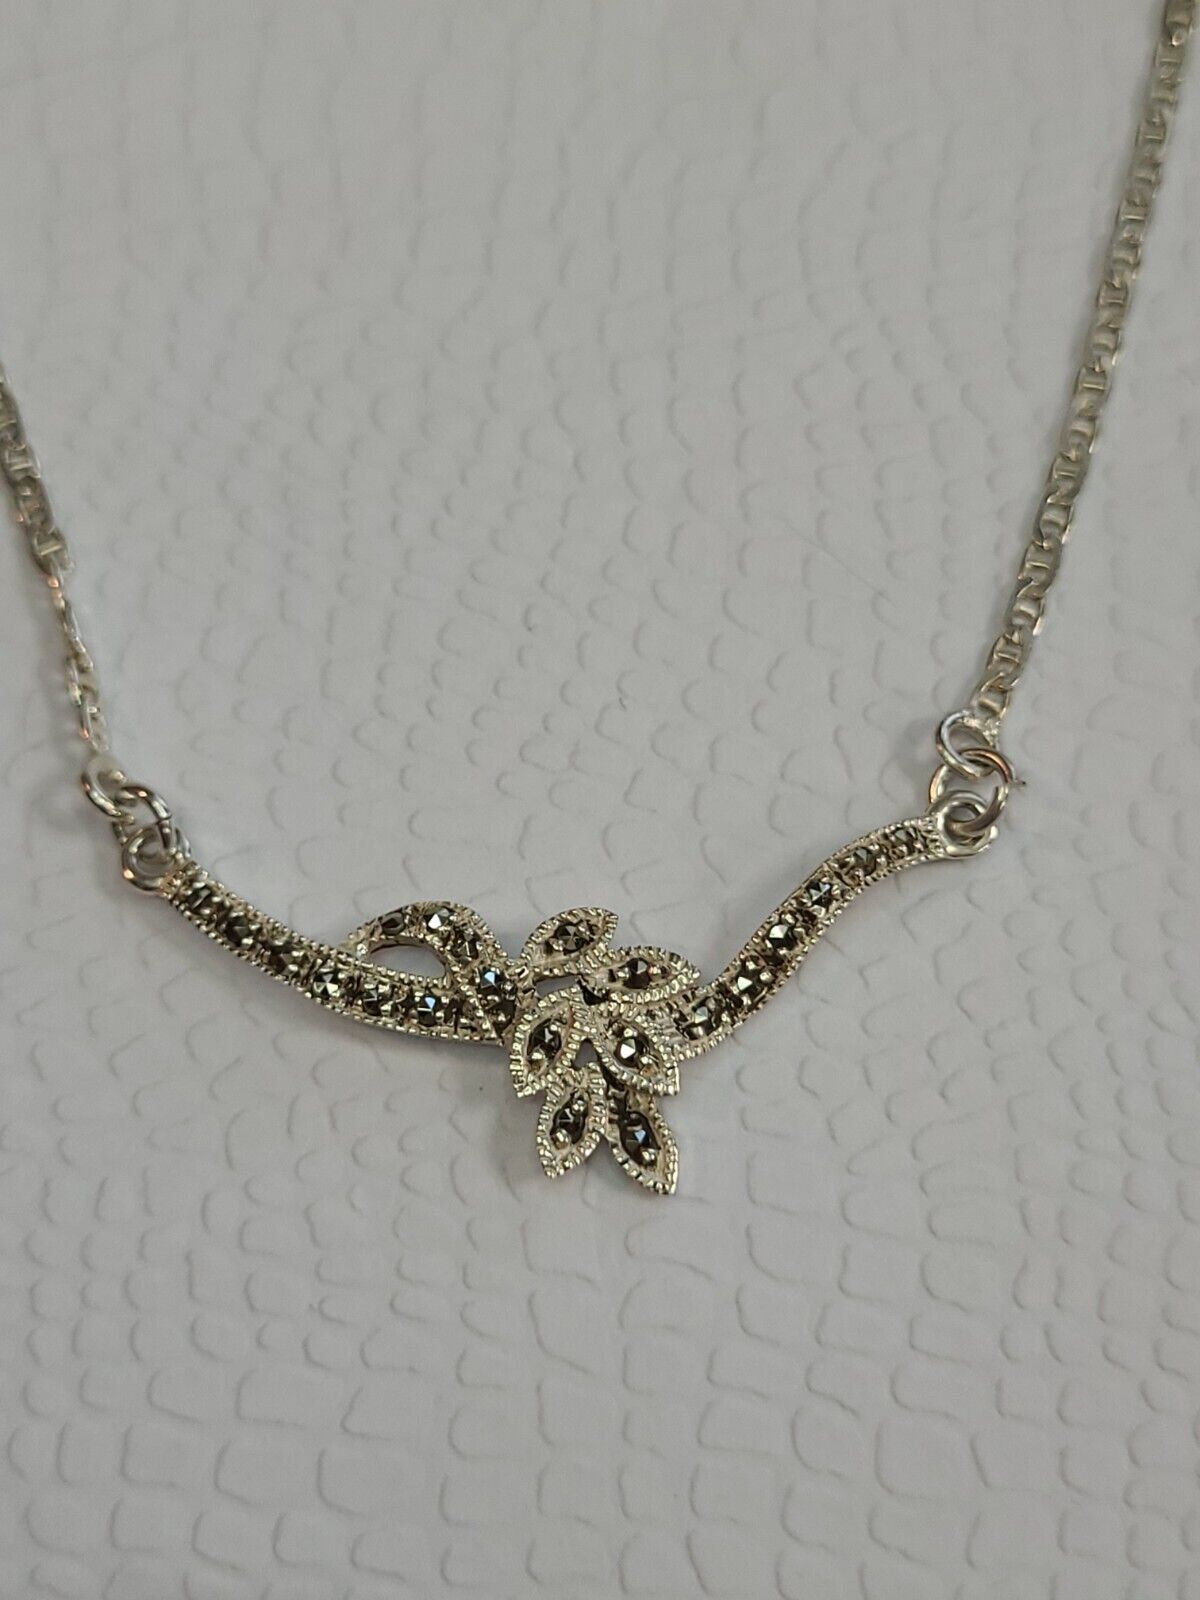 SOLID STERLING AND MARCASITE SIMPLY ELEGANT NECKL… - image 1